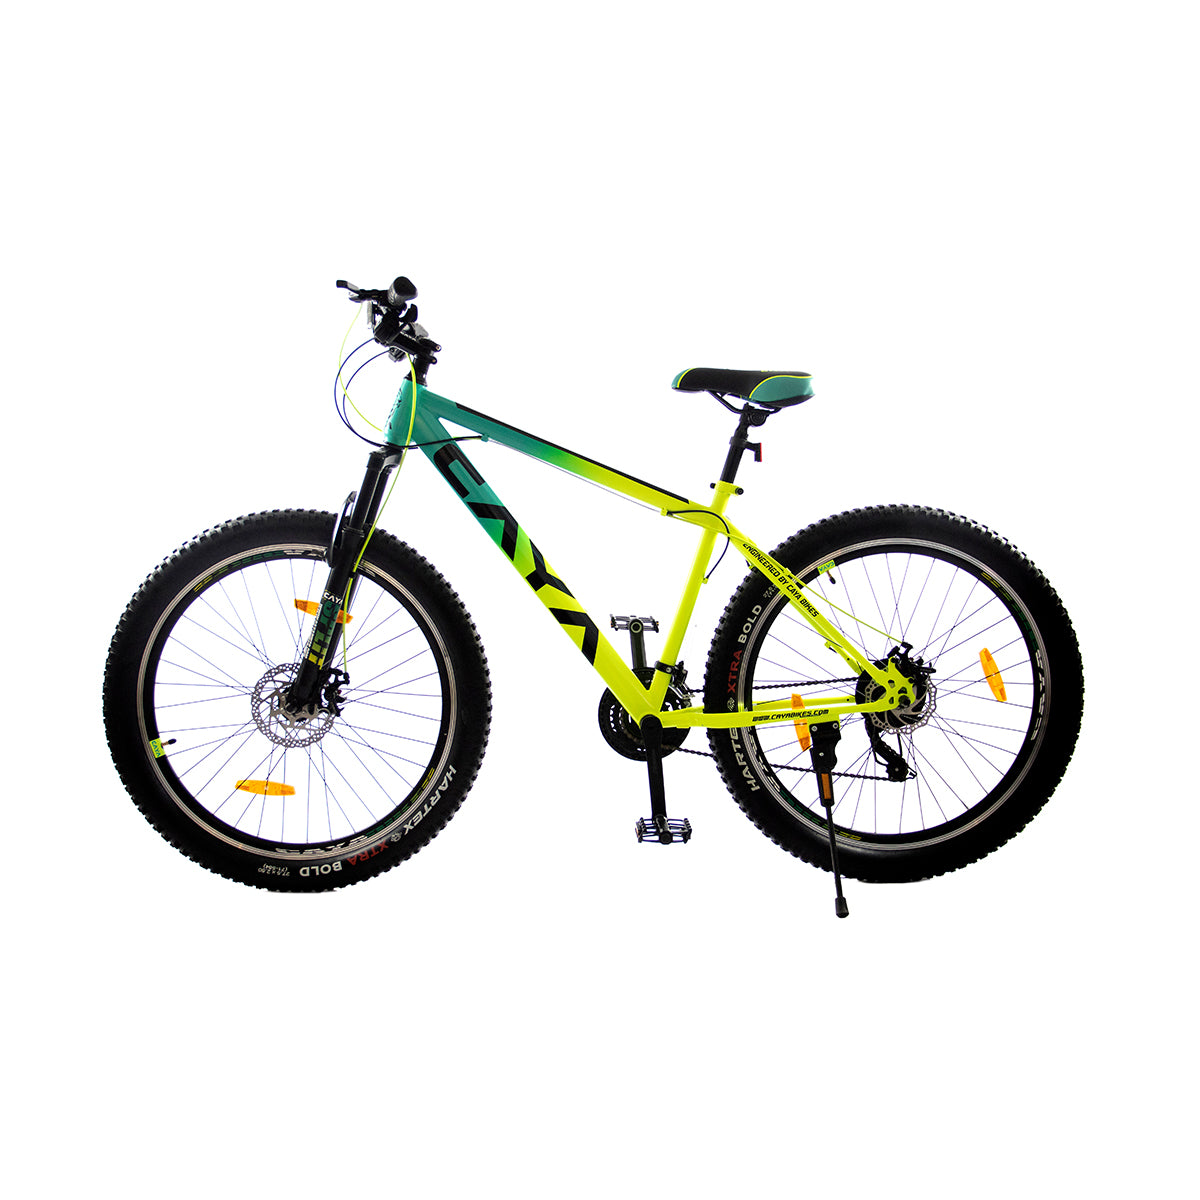 CAYA Split 27.5 MTB Cycle with Disc Brakes & Suspension 21 Speed Microshift